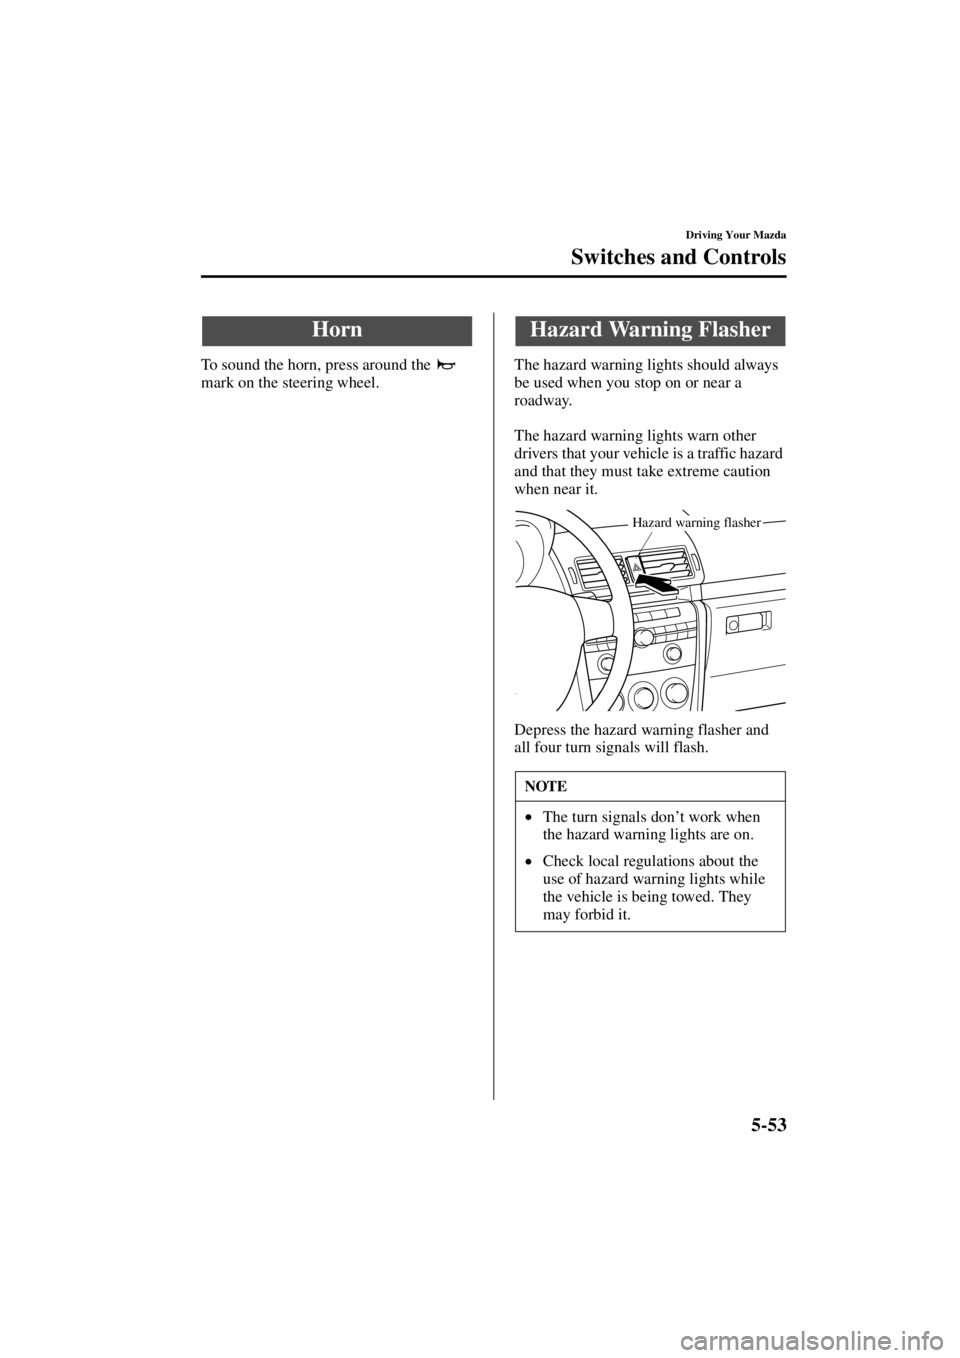 MAZDA MODEL 3 4-DOOR 2004  Owners Manual 5-53
Driving Your Mazda
Switches and Controls
Form No. 8S18-EA-03I
To sound the horn, press around the   
mark on the steering wheel.The hazard warning lights should always 
be used when you stop on o